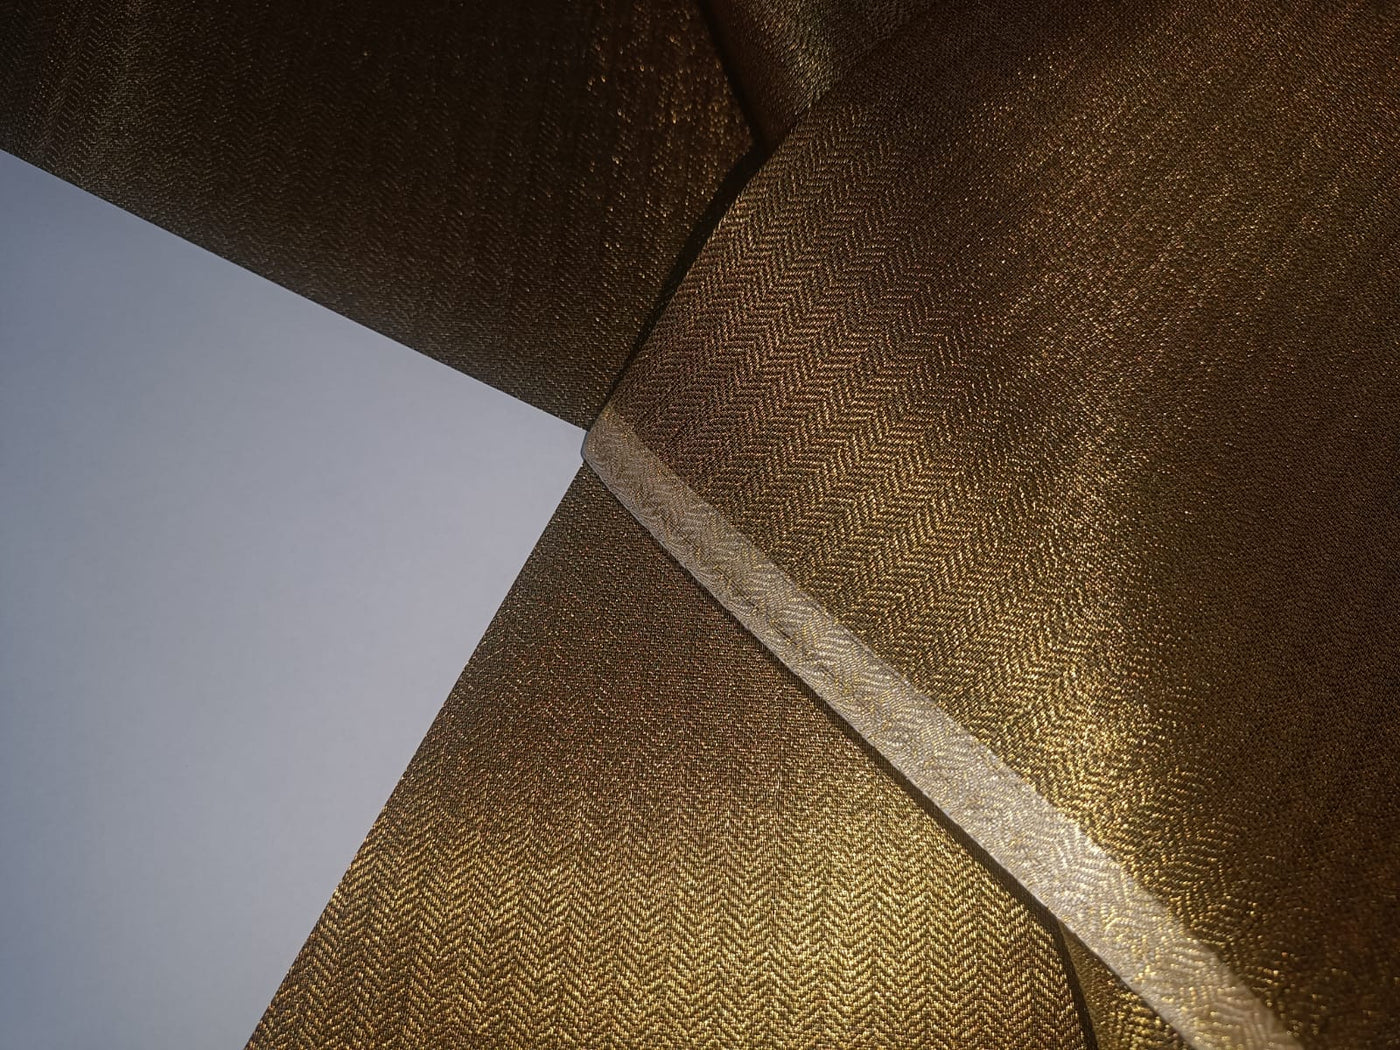 Brocade Tissue fabric available in 3 colors namely metallic antique gold / Reversable silver gold AND Silver Grey color 44" wide BRO888